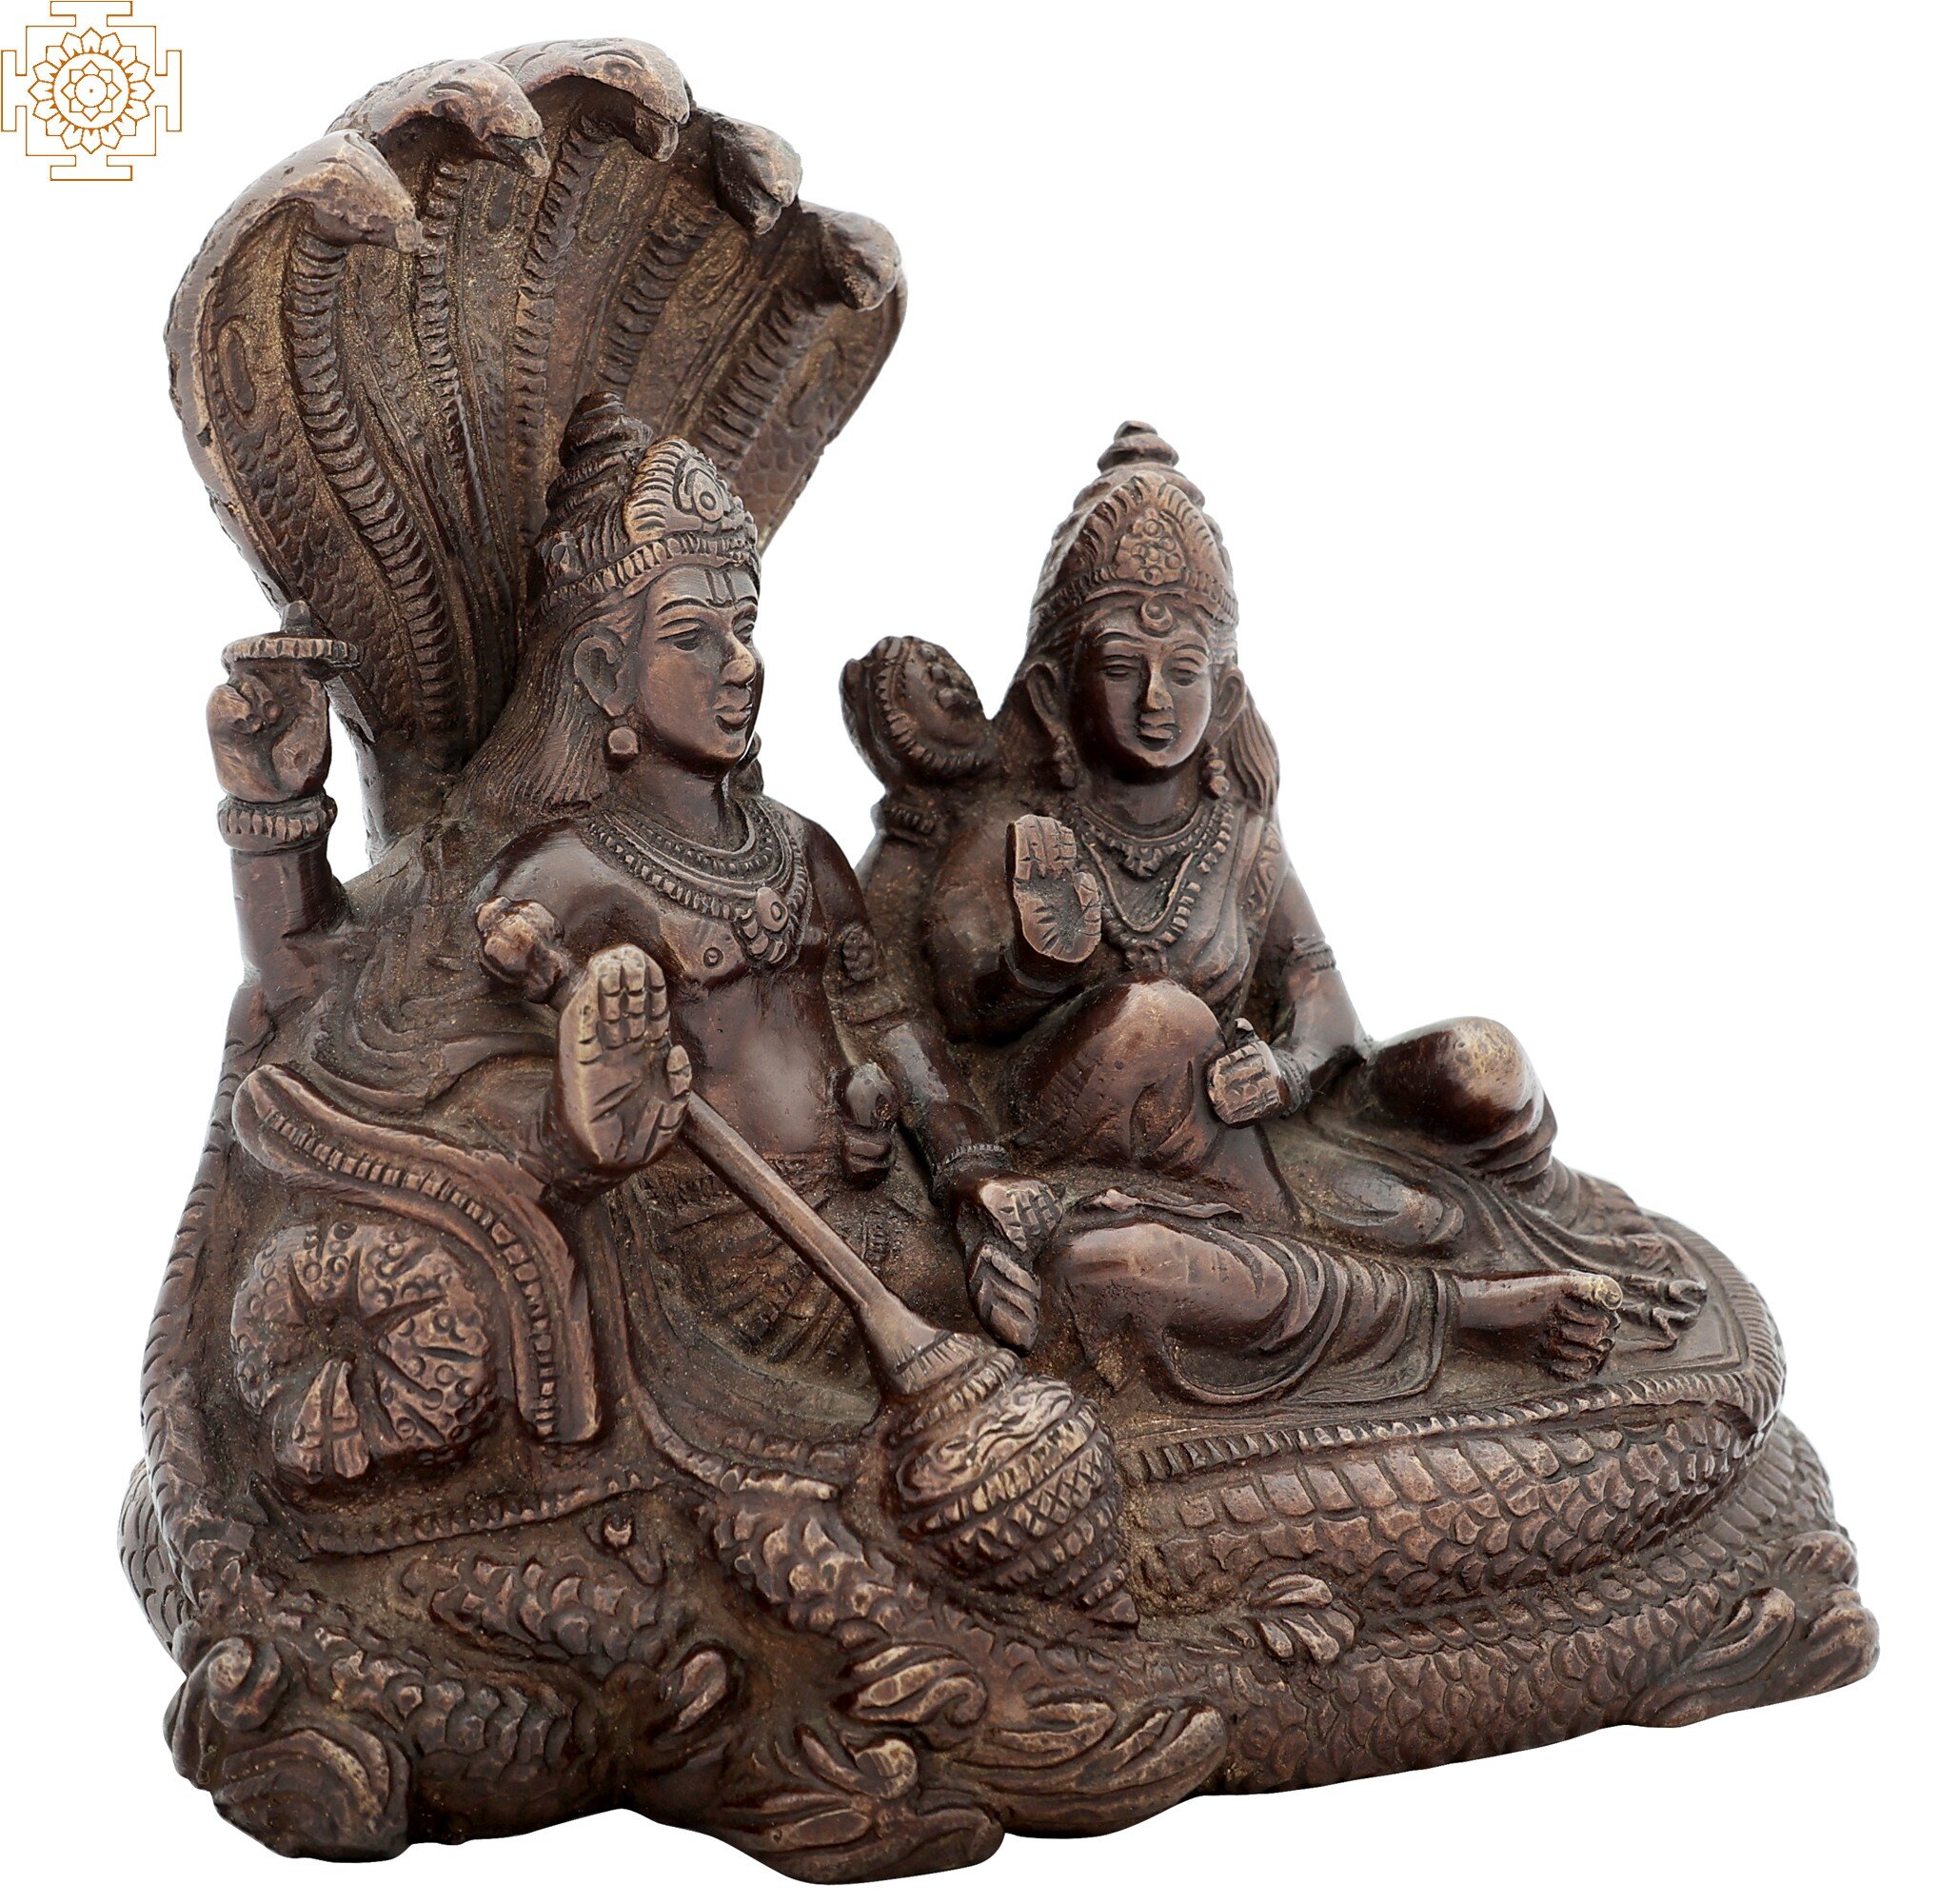 Buy Exotic India Lord Vishnu in Yoga Nidra - Brass Sculpture Online at Low  Prices in India - Amazon.in